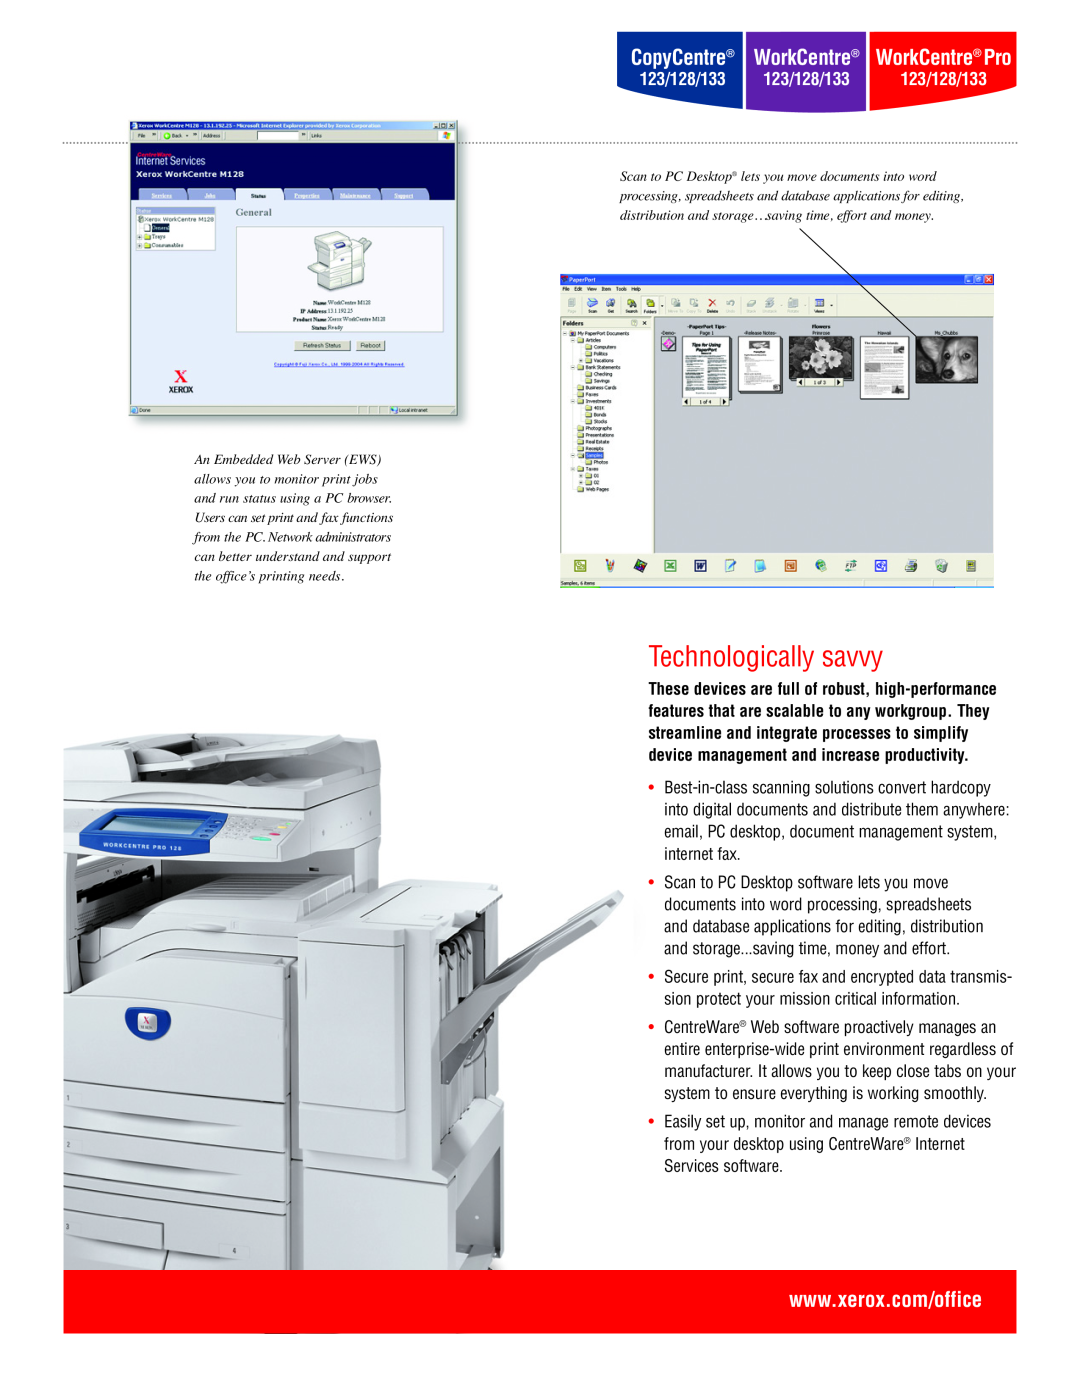 Xerox manual Technologically savvy, CopyCentre WorkCentre WorkCentre Pro, 123/128/133 123/128/133 123/128/133 